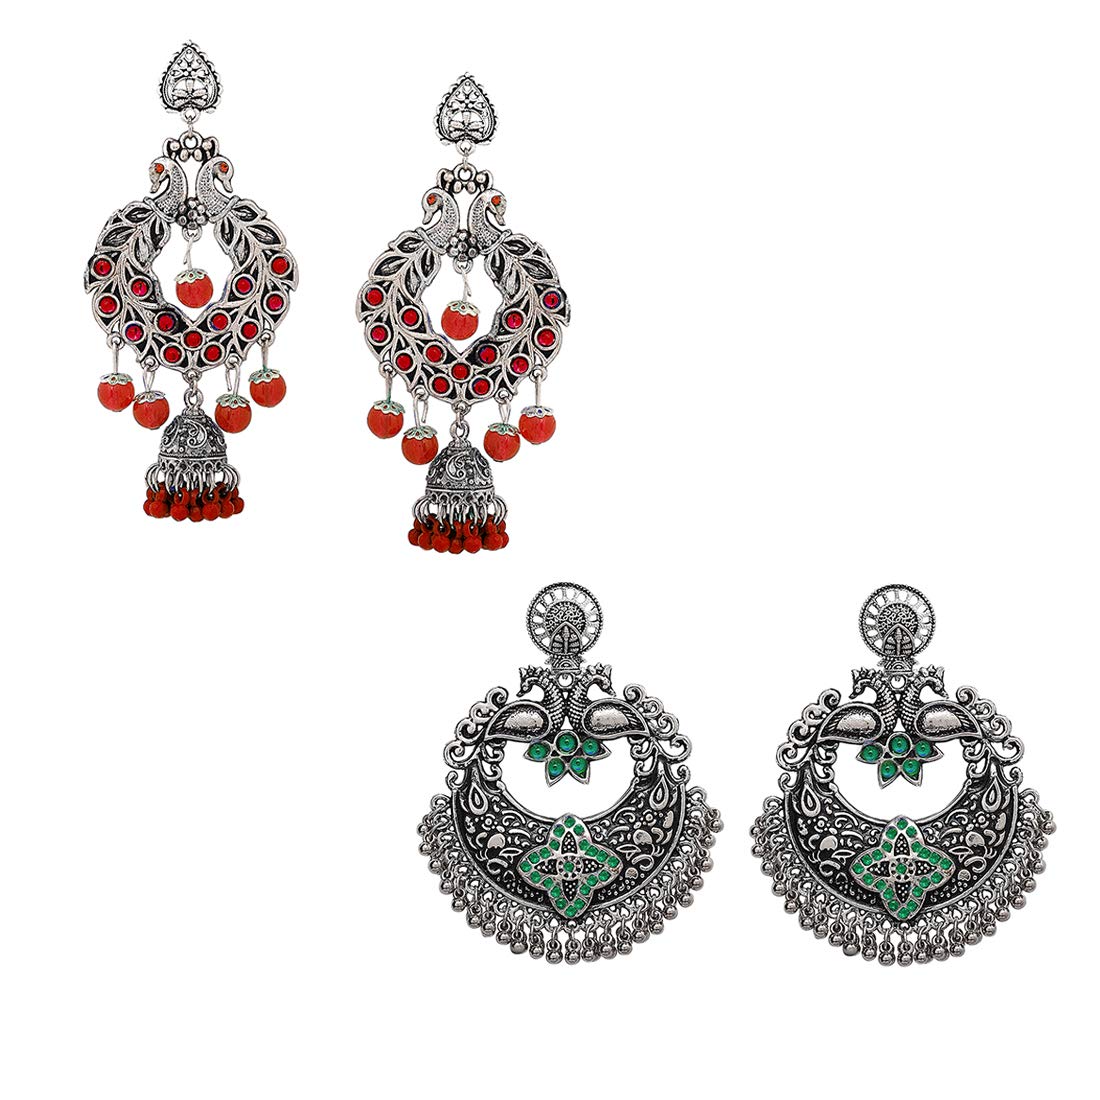 Yellow Chimes Combo of 2 Pairs Ethnic Silver Oxidised Floral Design Beads Studded Stones Chandbali Jhumka Earrings for Women and Girls, red, green, medium (YCTJER-CHNDNGLR-C-RDGR)